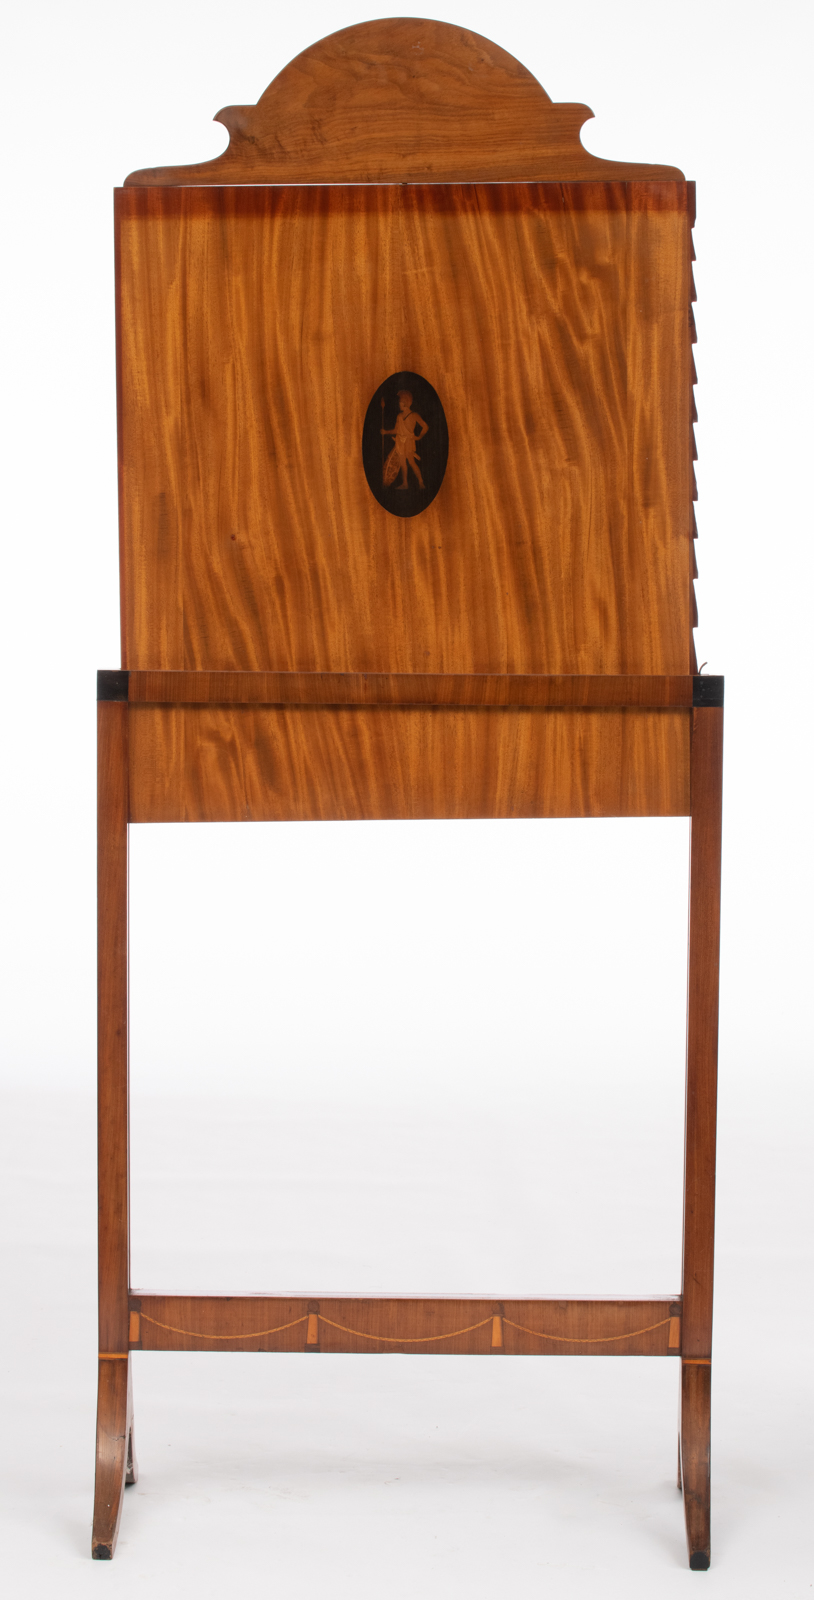 A very fine Biedermeier mahogany and walnut extendable fire screen, decorated with marquetry of waln - Image 5 of 5